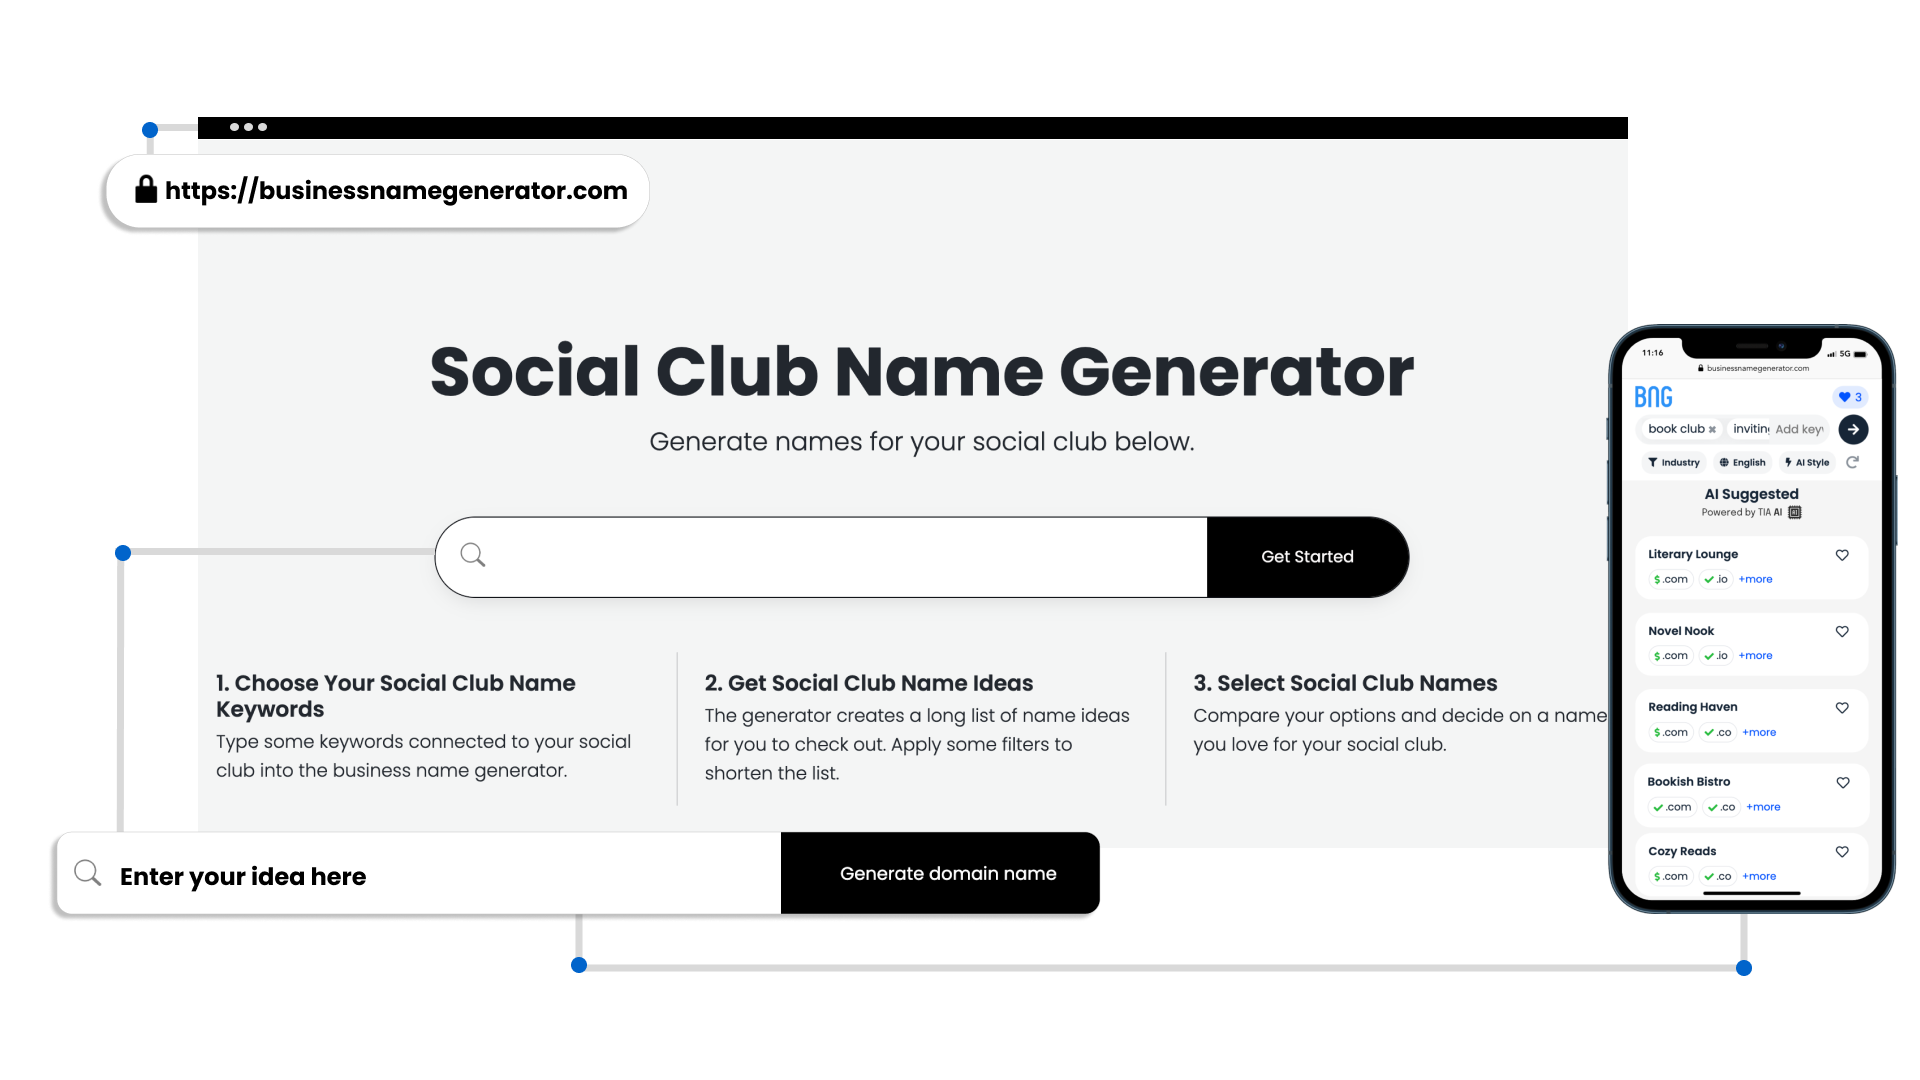 Benefits of Our Social Club Name Generator